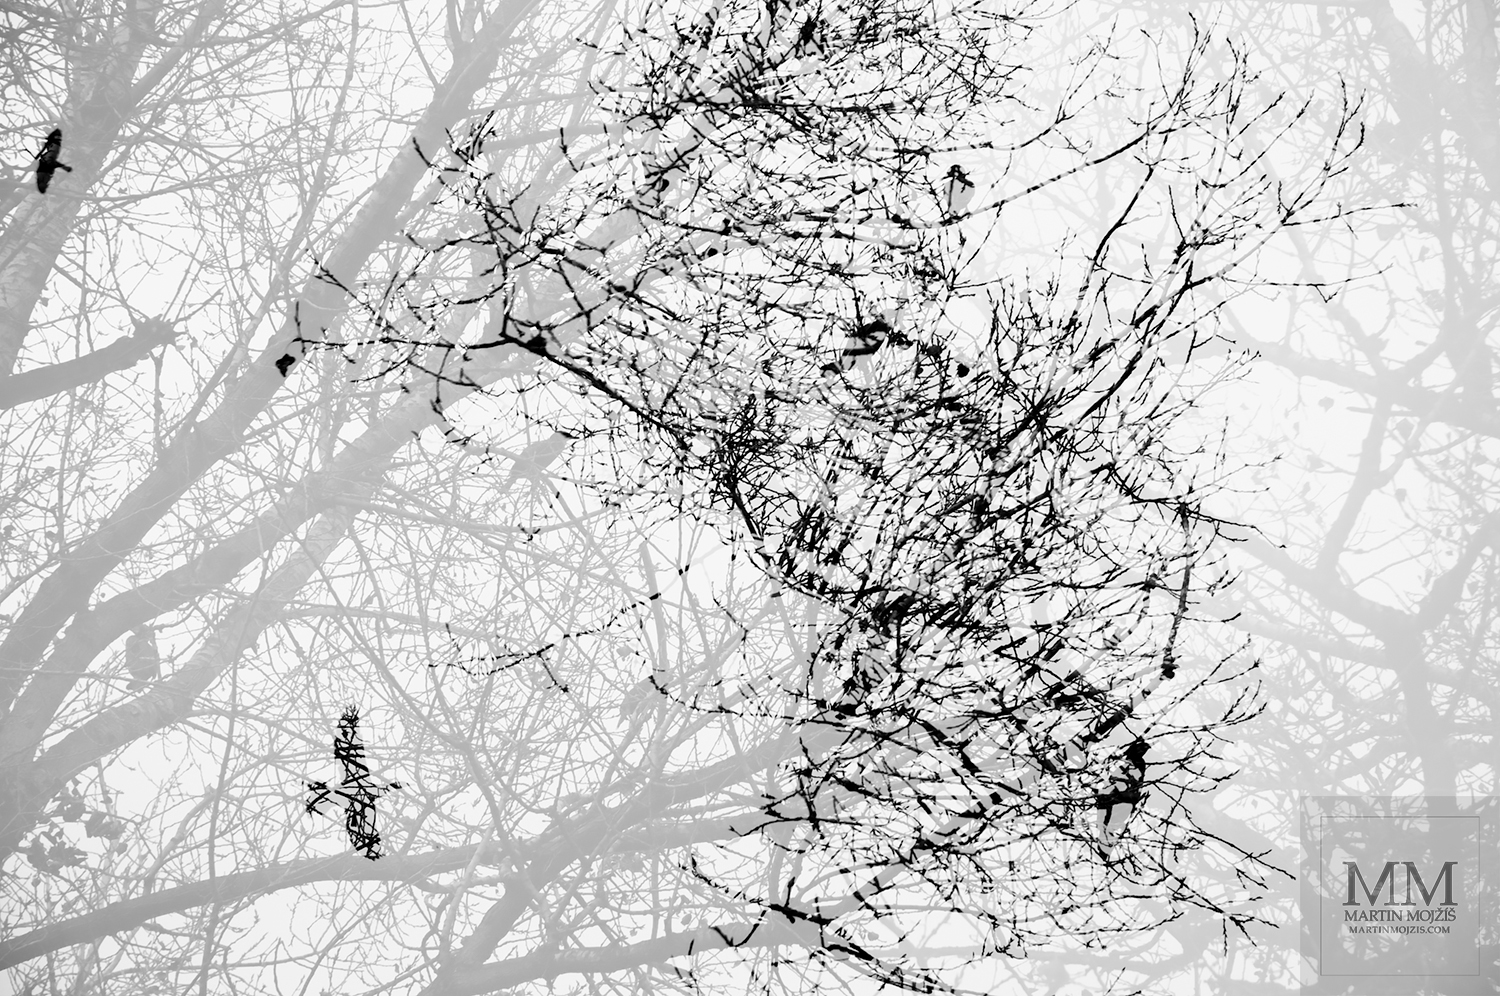 Blended tree branches and birds. Fine Art black and white photograph of Martin Mojzis with the title TO THE ANOTHER WORLDS I.